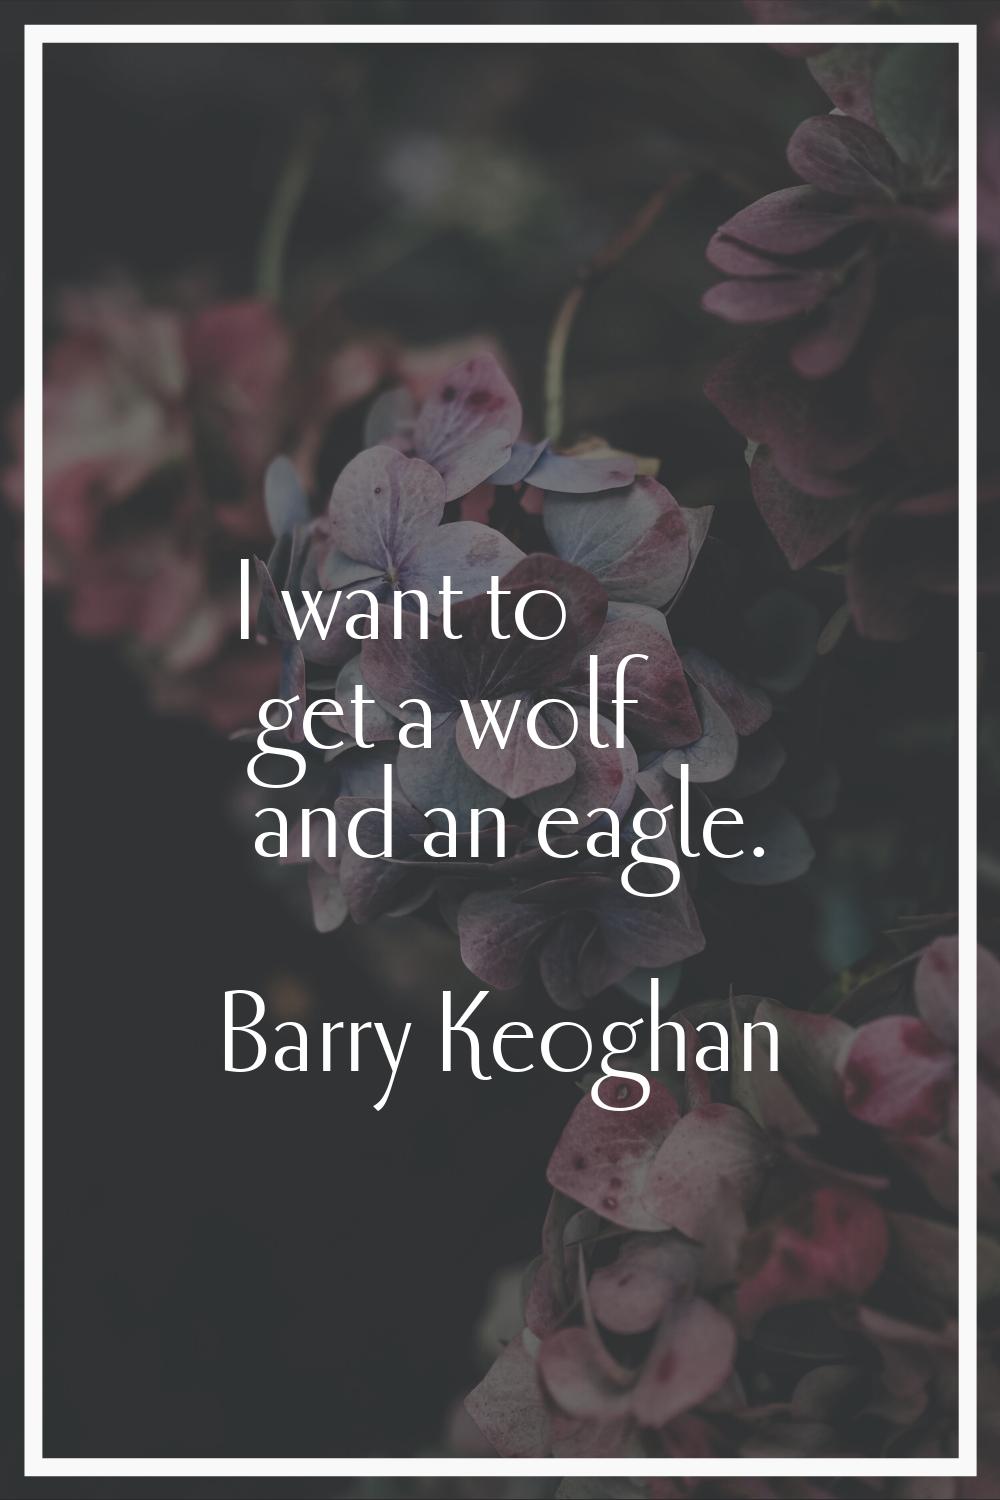 I want to get a wolf and an eagle.